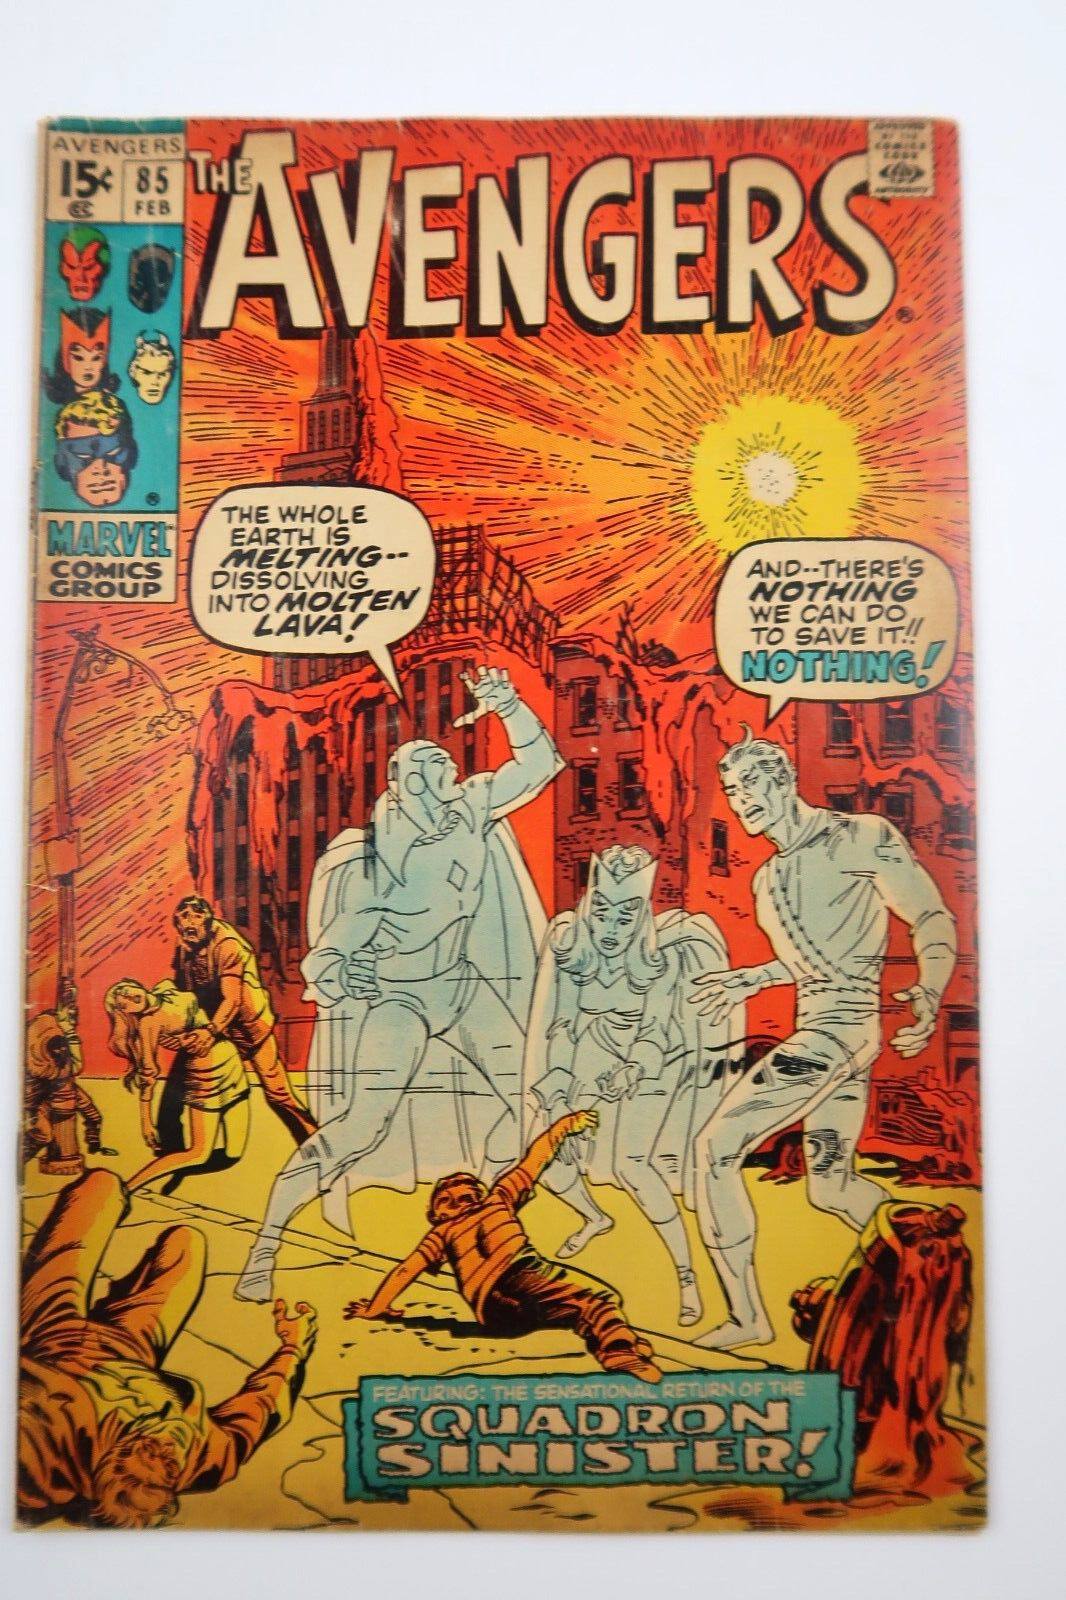 The Avengers #85 1st Appearance of the Squadron Supreme 1971 Marvel Comcis G/VG